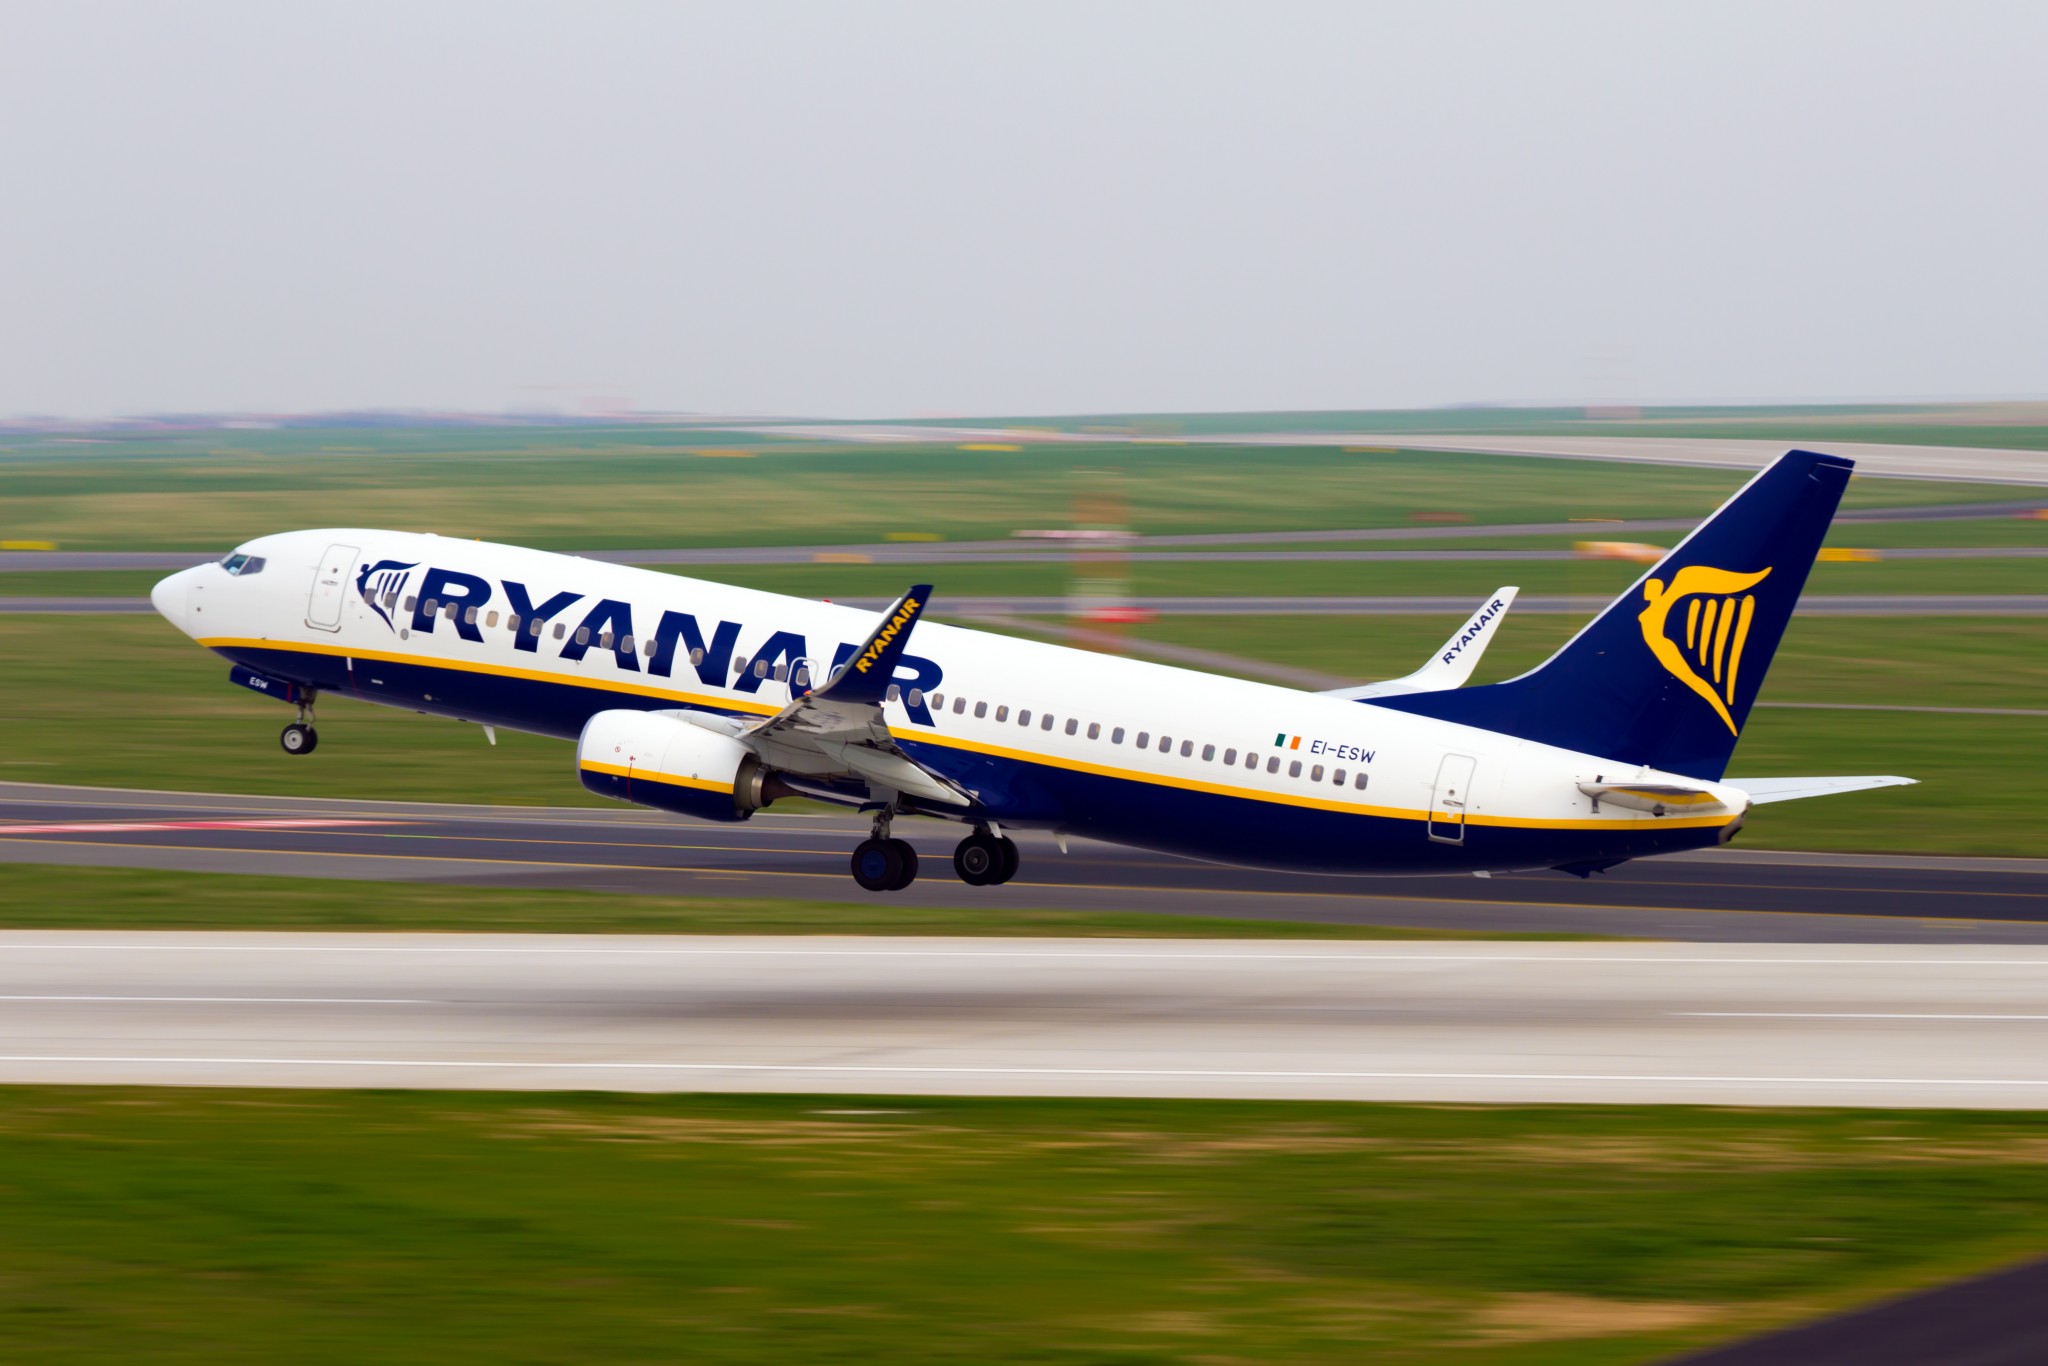 Ryanair signs new agreement with JMC